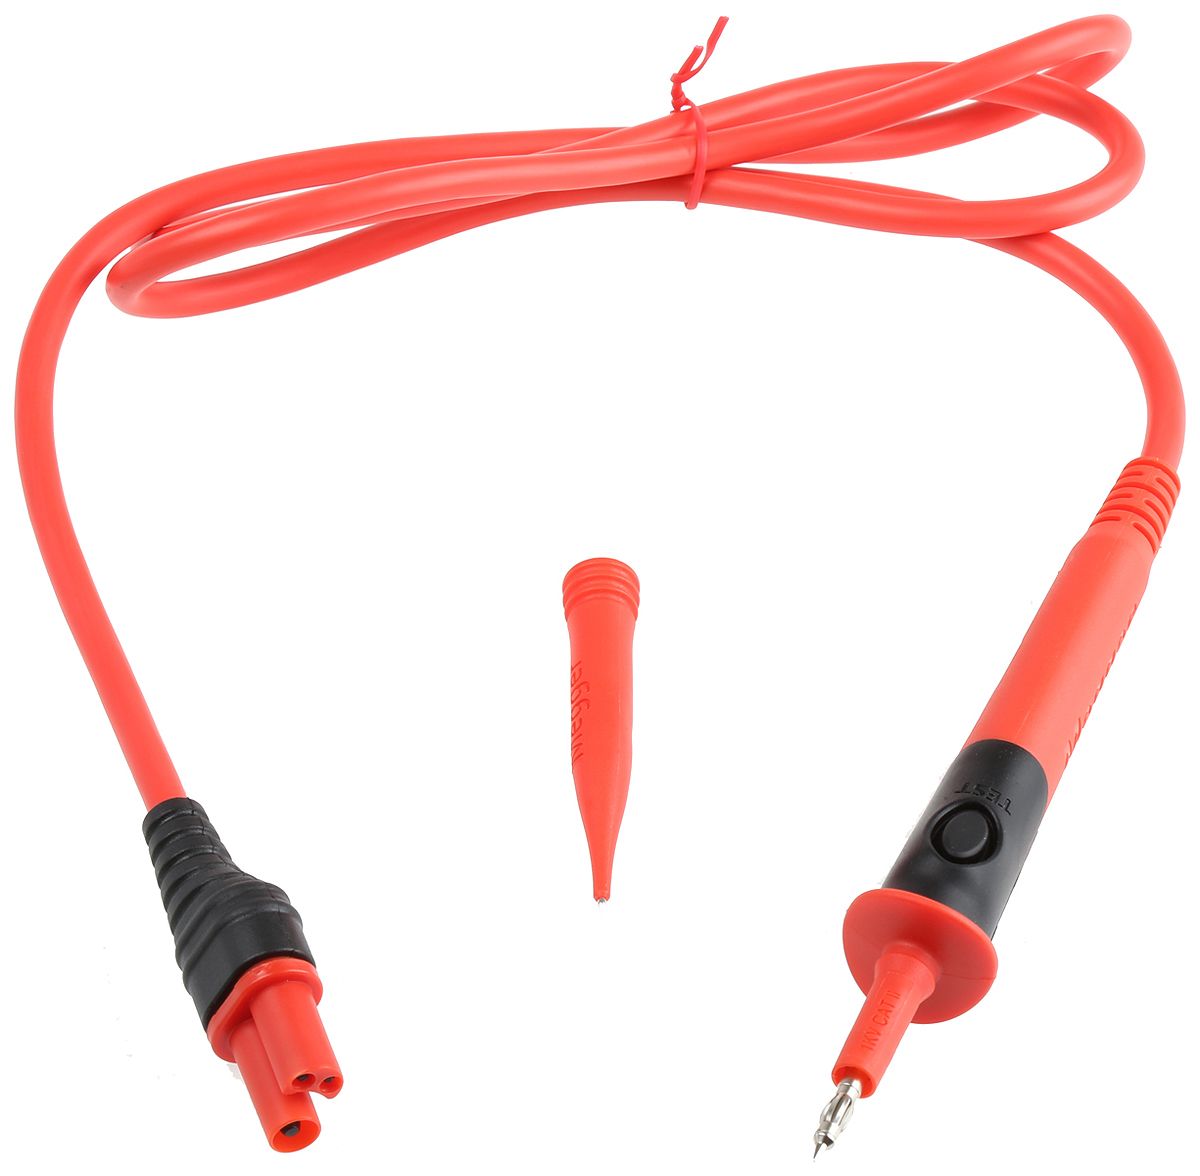 Megger 1007-157 Insulation Tester Probe, For Use With MIT480